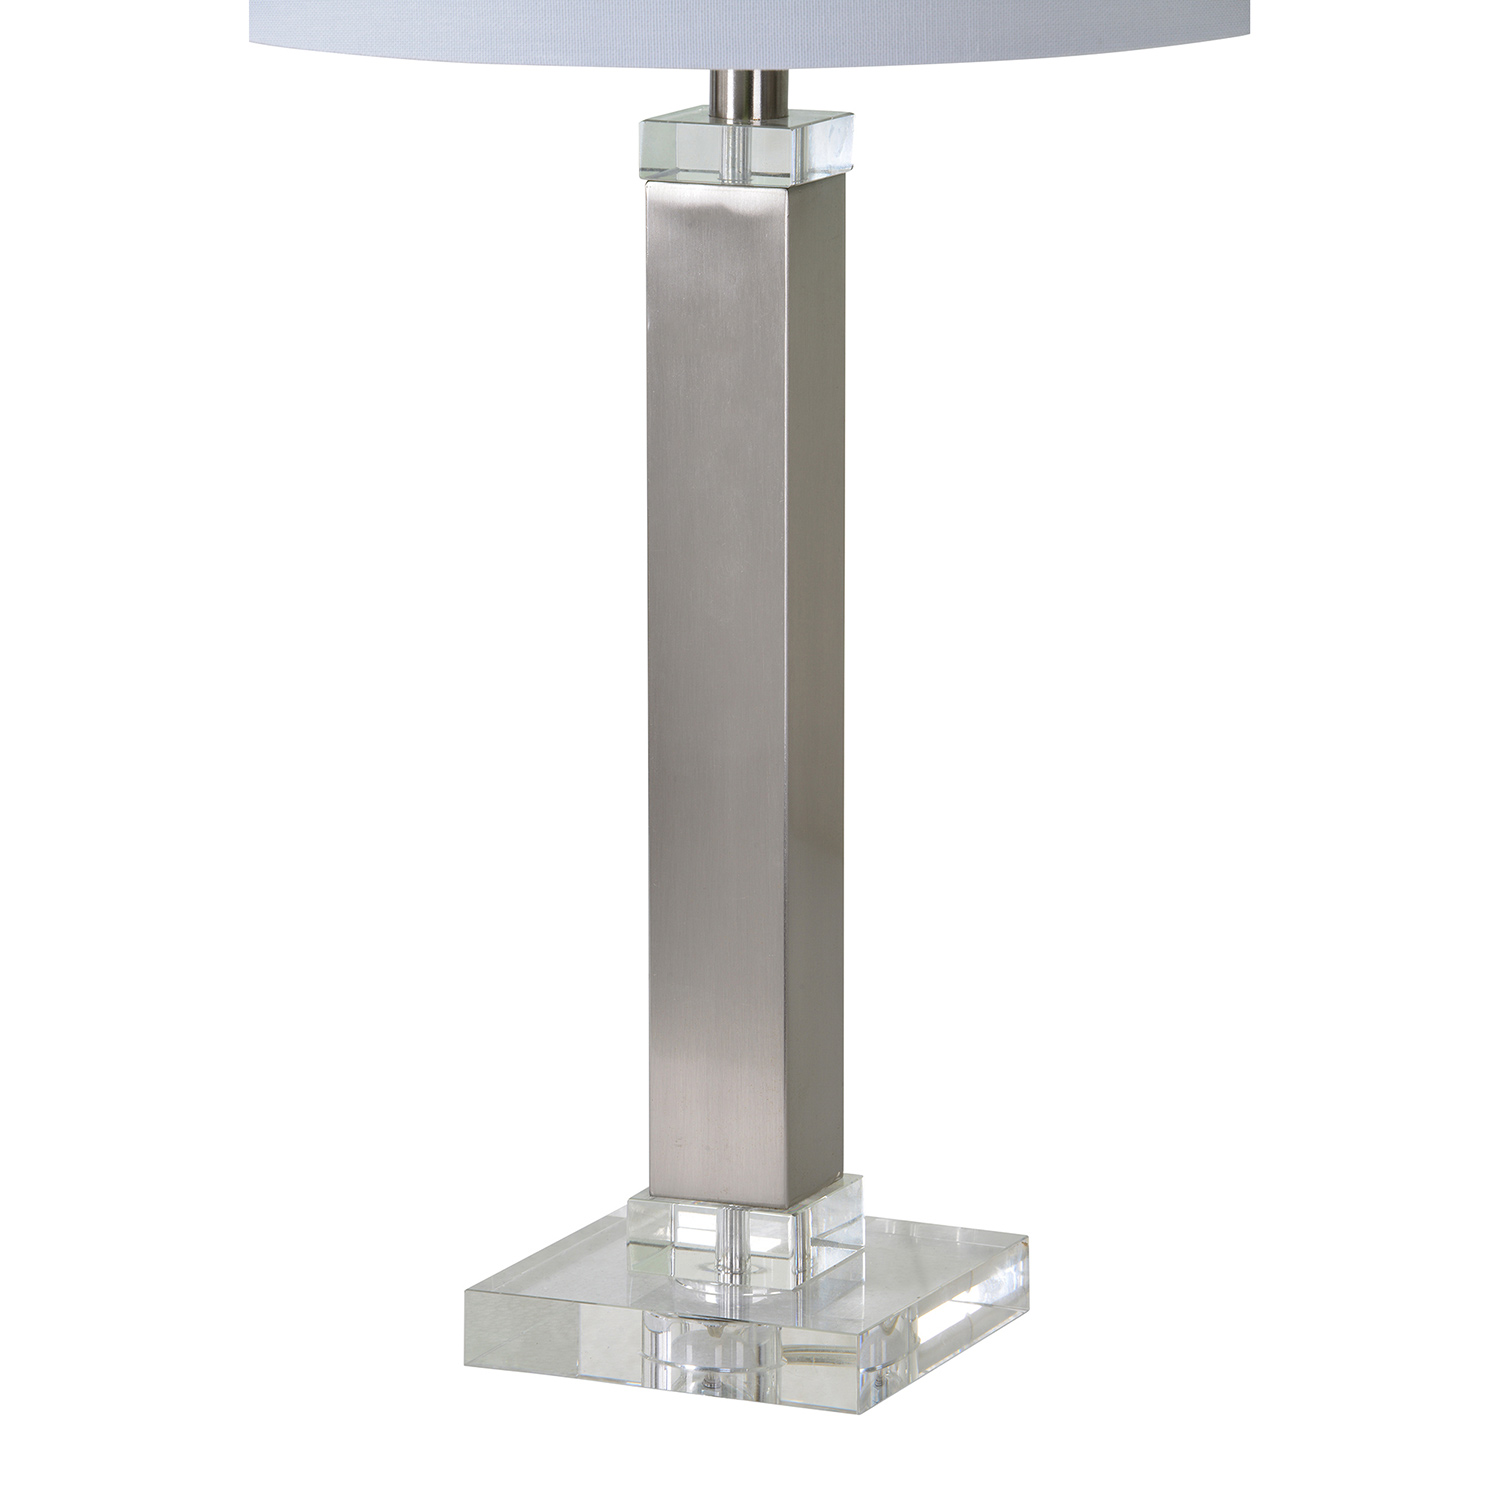 Ren-Wil Sauline Table Lamp - Clear